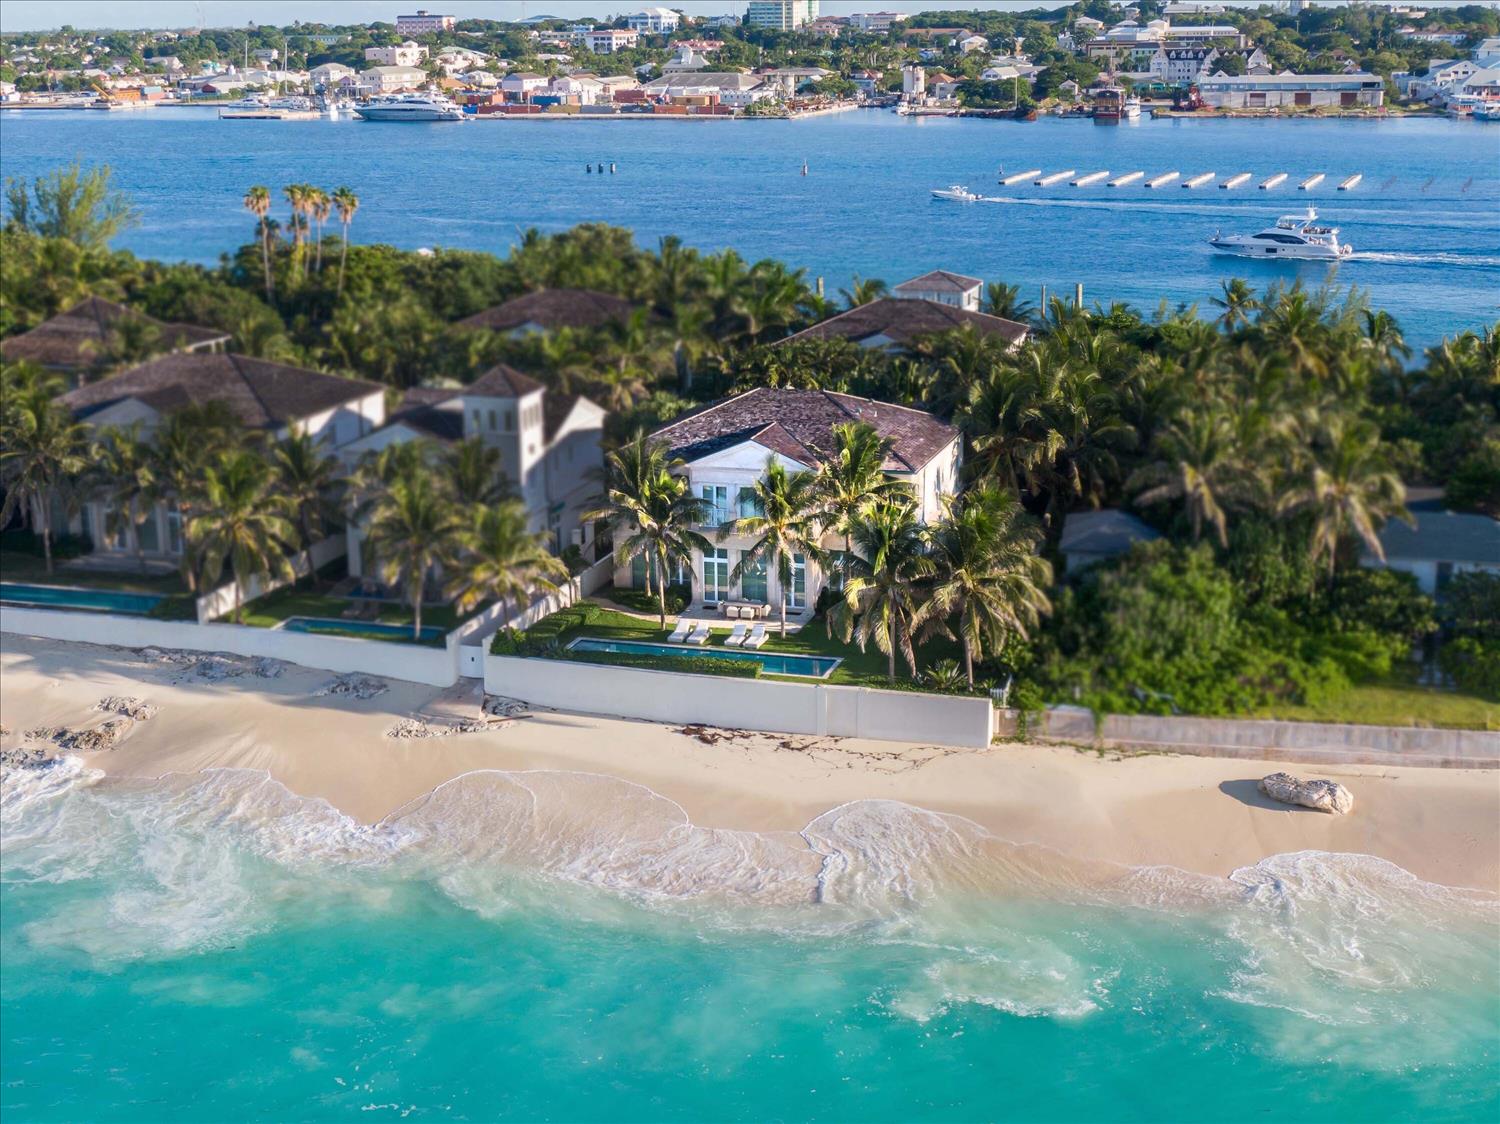 Luxurious Turnkey Villa on Exclusive Paradise Island, Bahamas to Auction No Reserve via Concierge Auctions